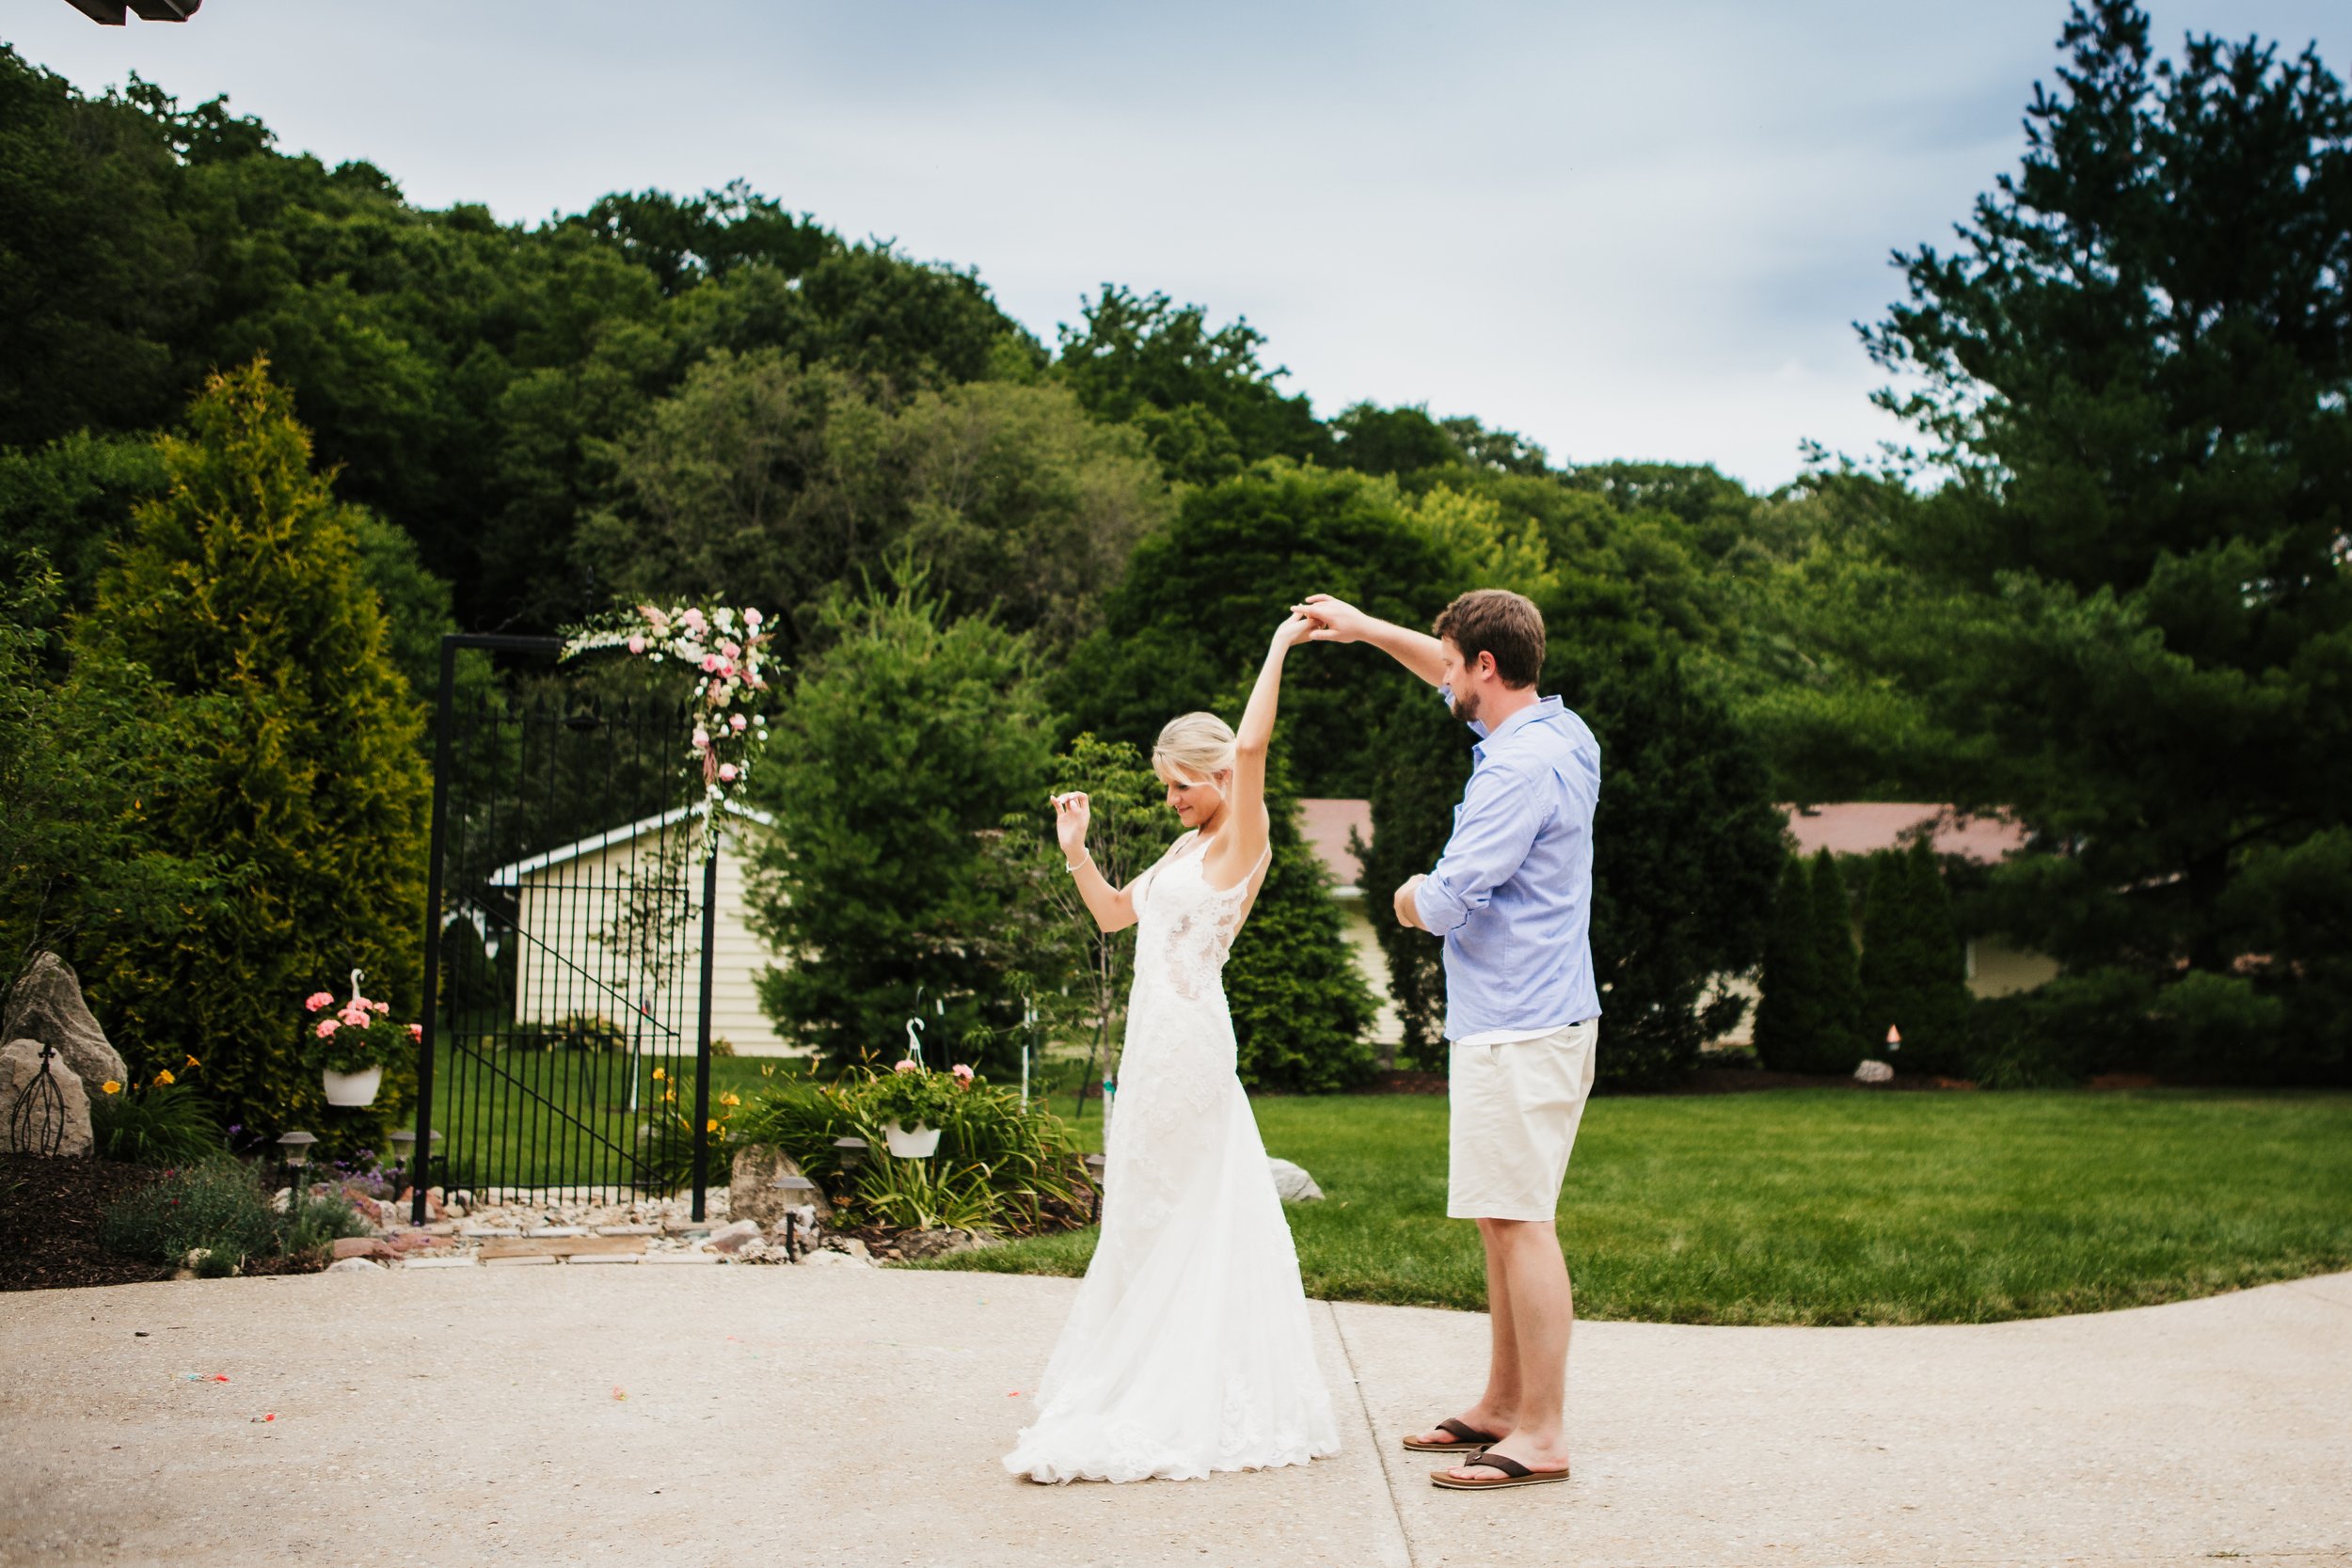  Husband and wife have their first dance after their intimate wedding ceremony in front of a barn. dance white wedding dress lace groom in shorts #TealaWardPhotography #illinoisphotographer #princetonillinois #weddingphotographer #intimatewedding 